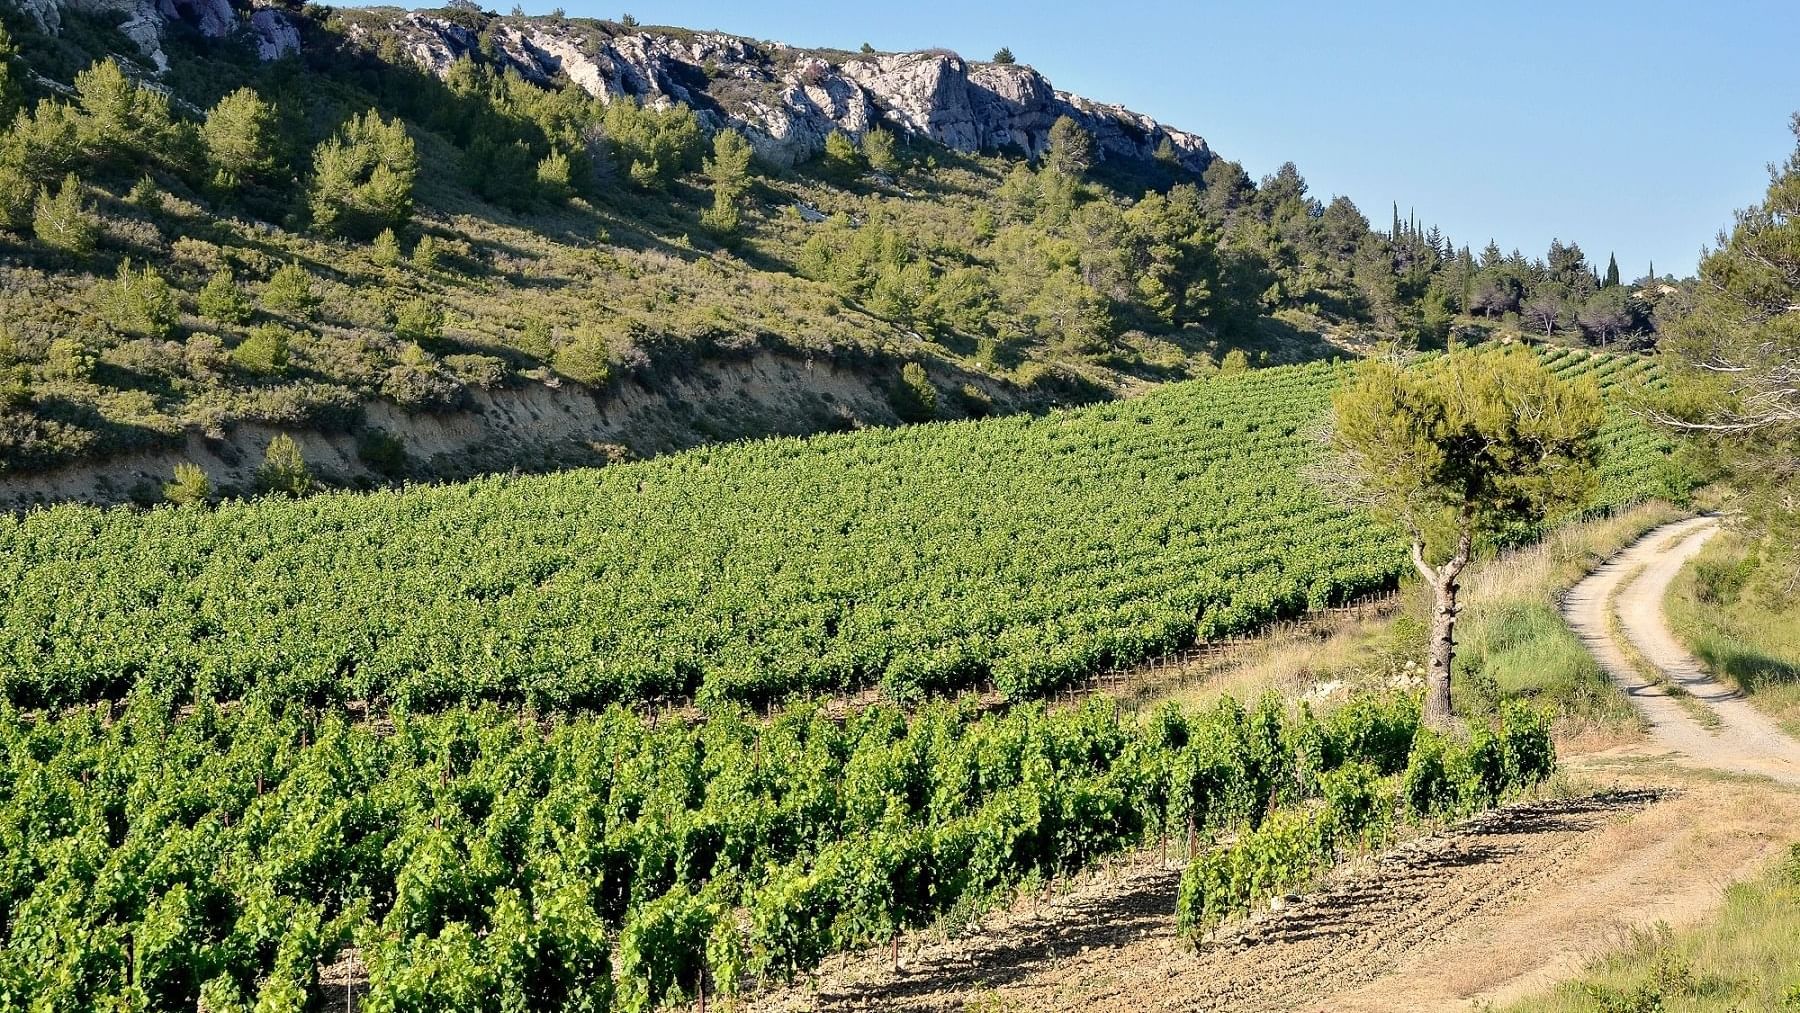 View of Trails among a large vineyard near Originals Hotels